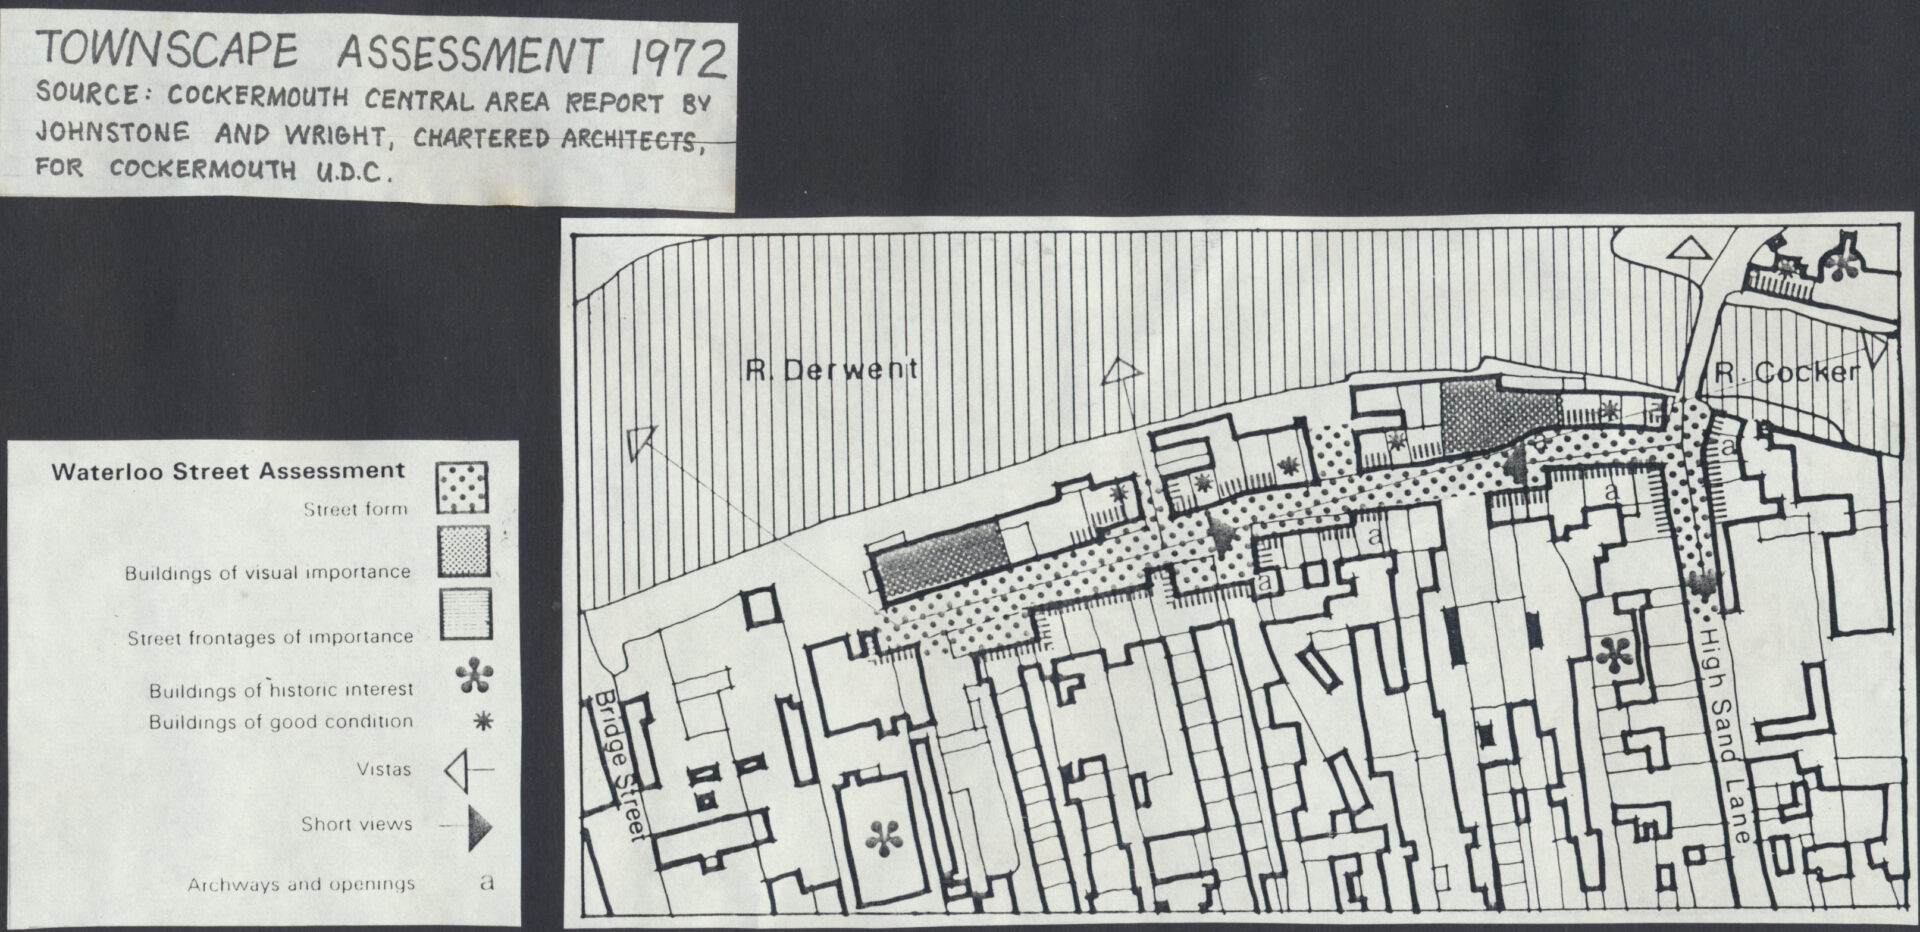 Map Townscape Assessment 1972 Johnstone and Wright Architects for Cockermouth UDC scaled